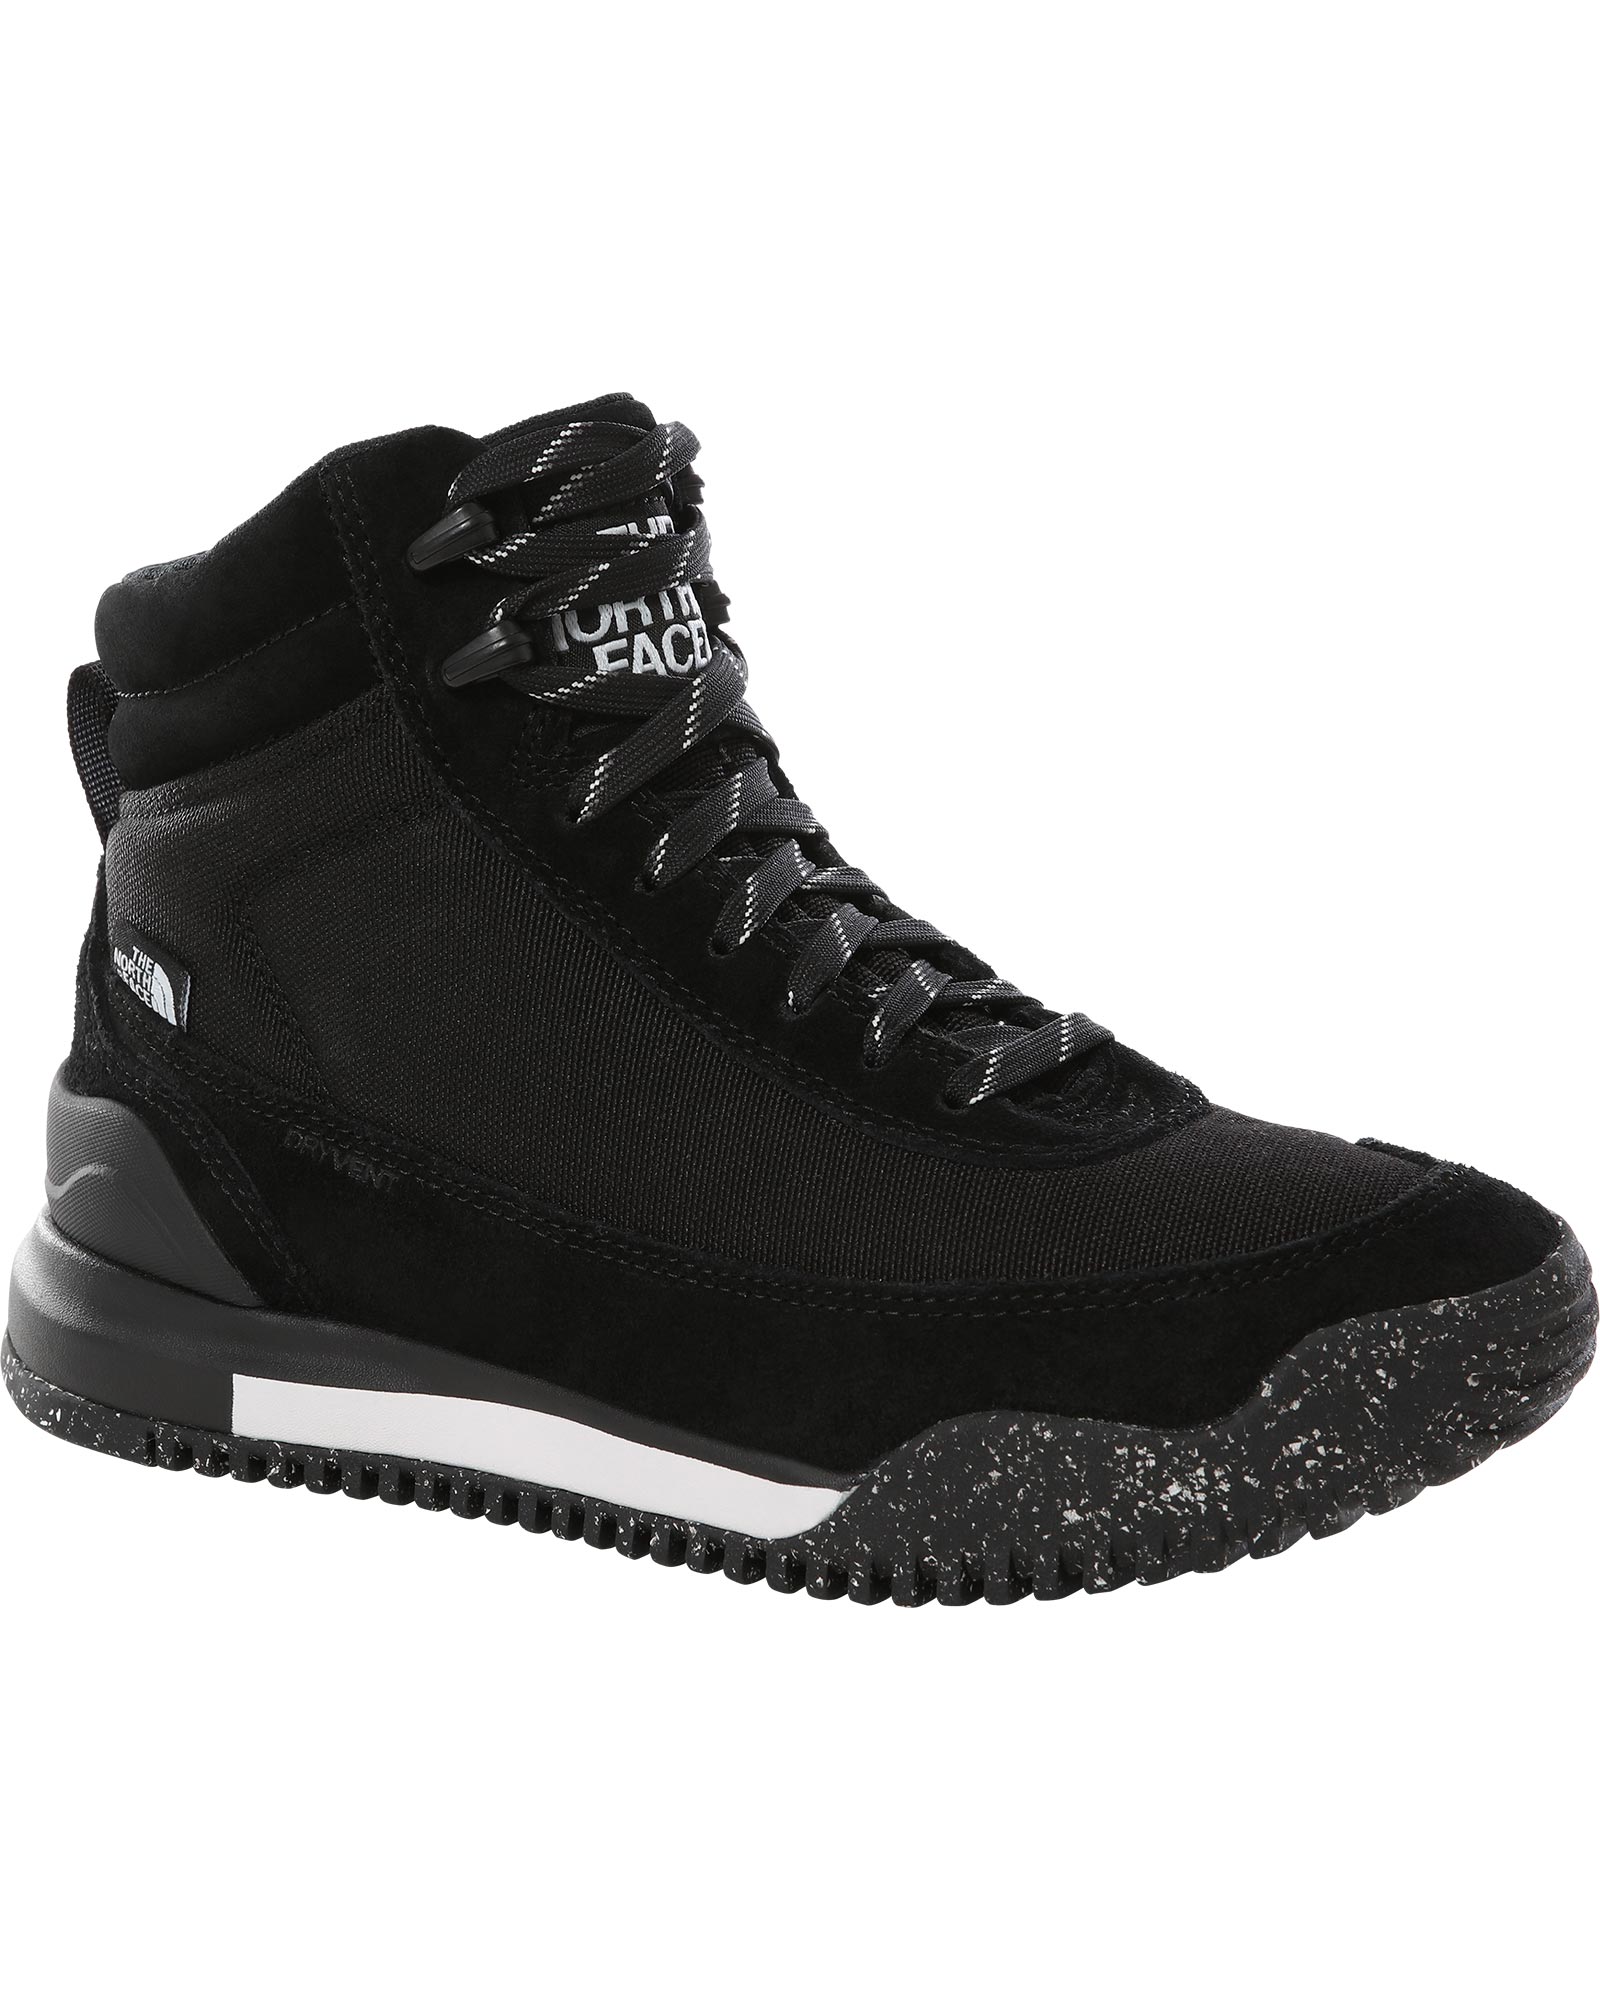 The North Face Back to Berkeley III Textile Women’s Waterproof Boots - TNF Black/TNF White UK 4